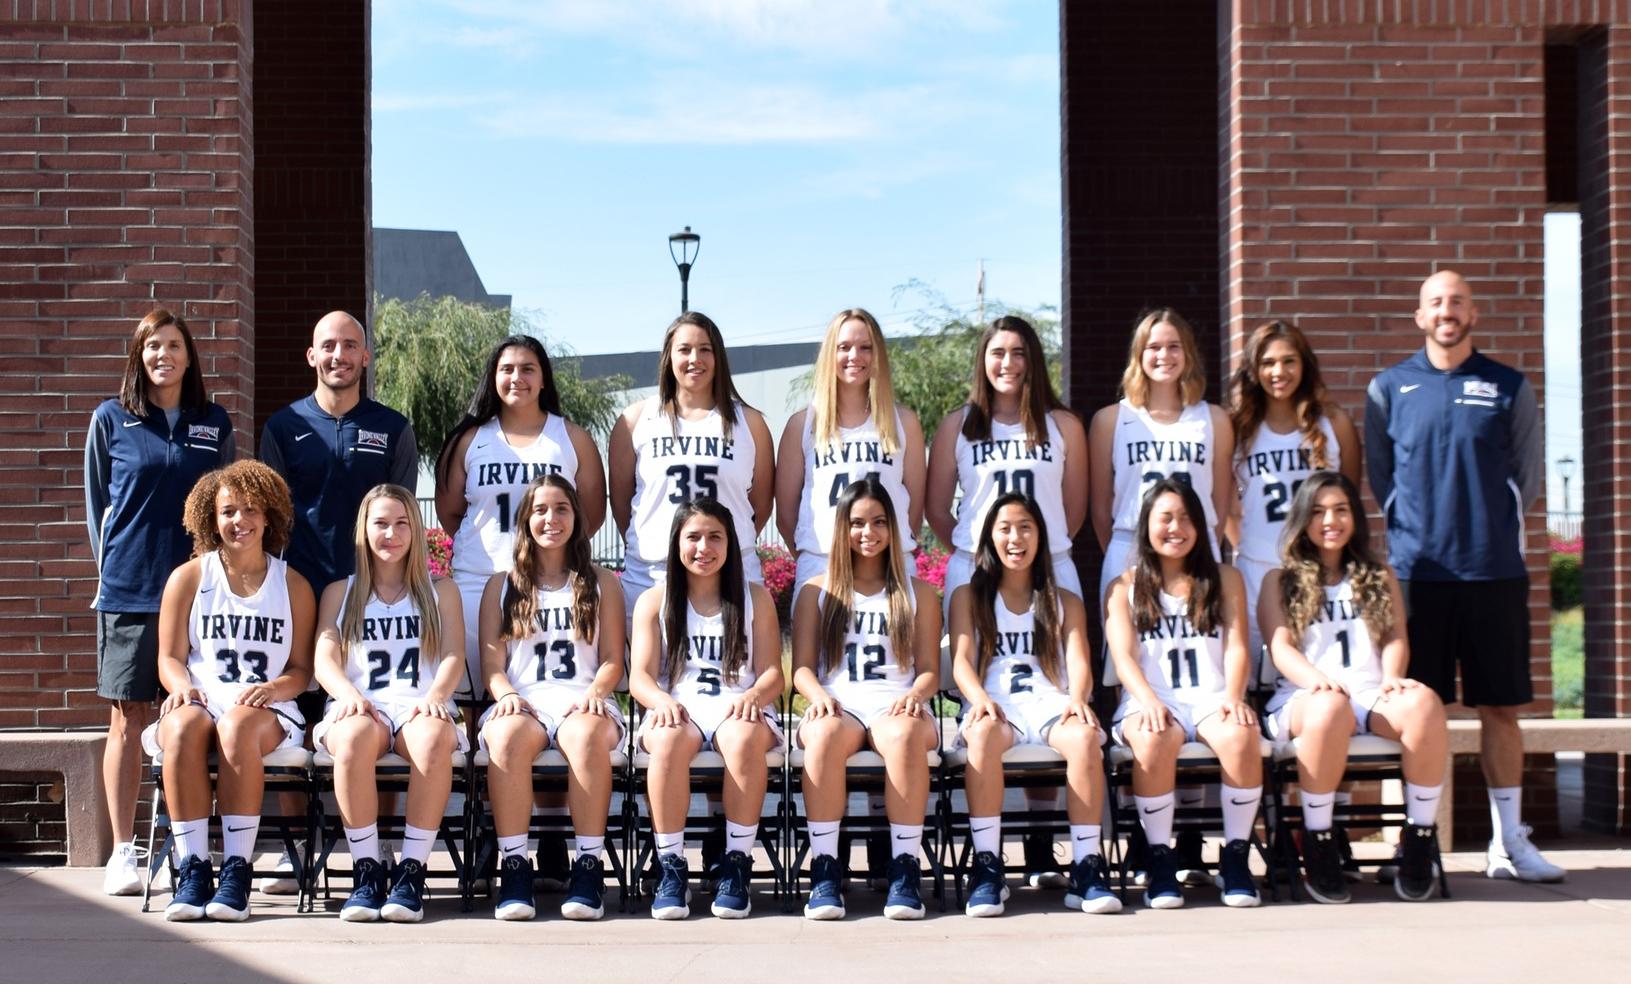 Women's basketball team ranked No. 8 in first state CCCSIA poll